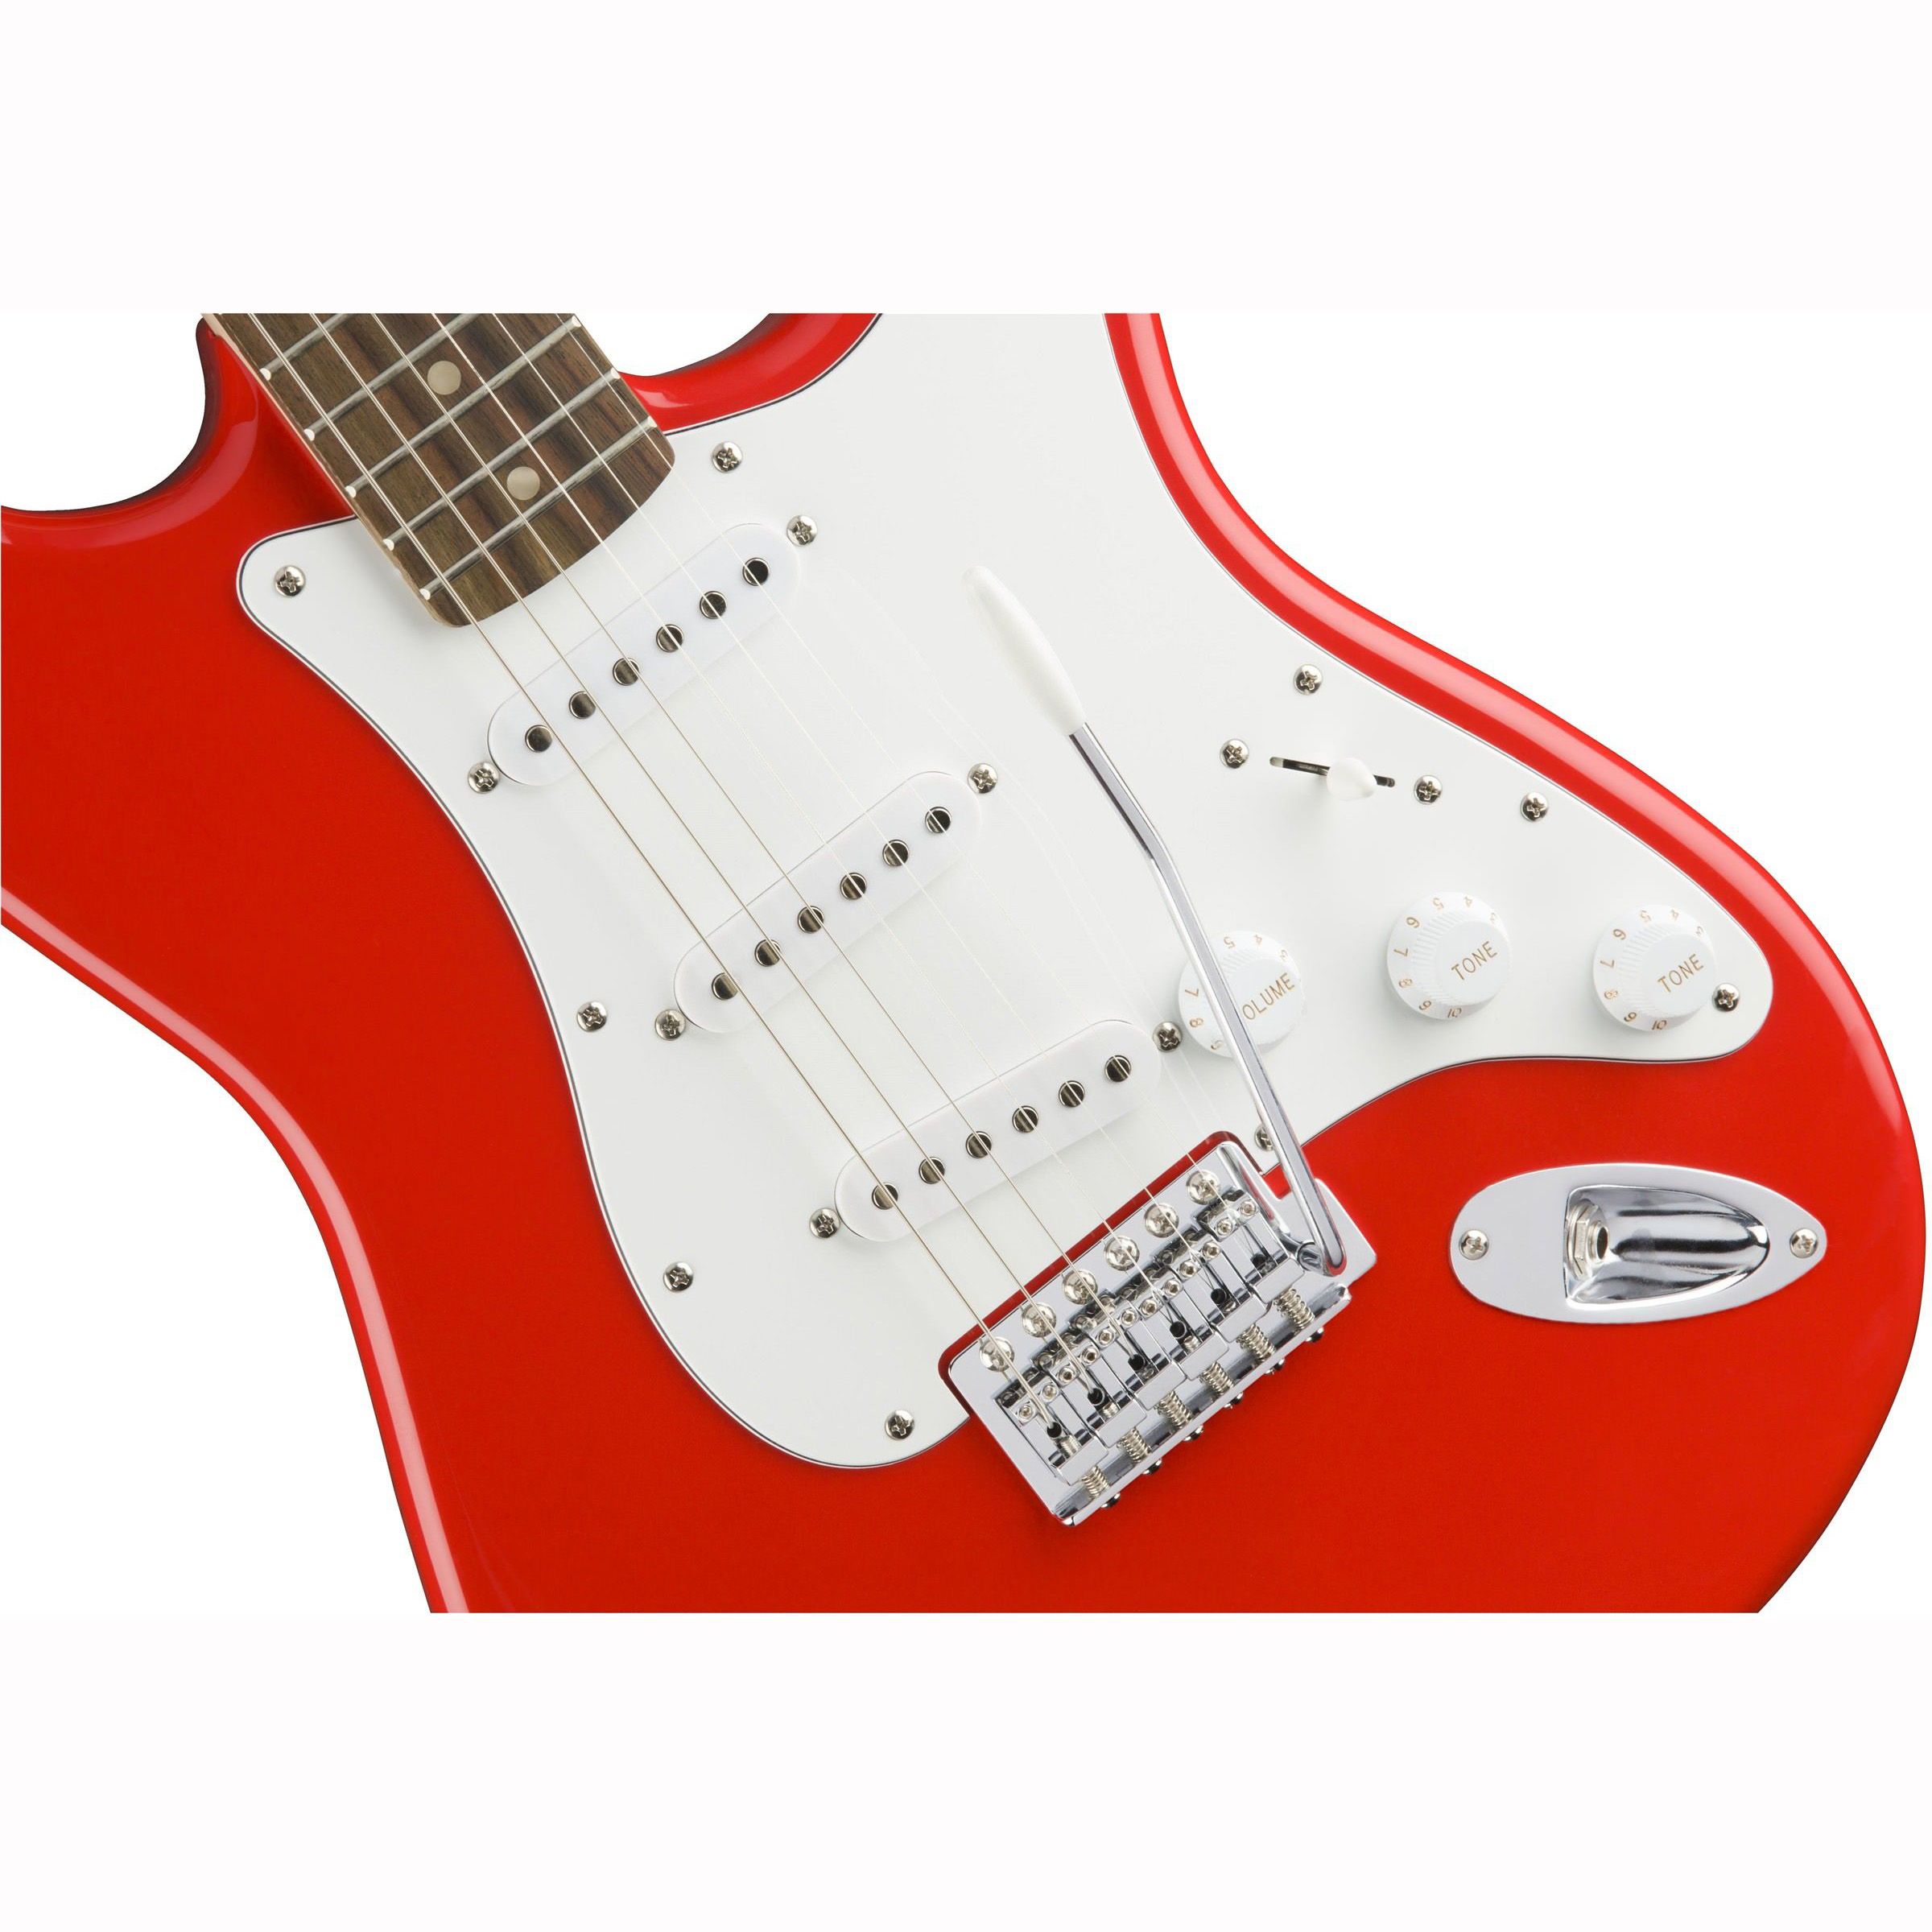 Squier mm stratocaster. Электрогитара Fender Squier Bullet. Гитара Fender Squier Stratocaster Affinity. Гитара Fender Squier Bullet Strat. Электрогитара Squier Affinity Stratocaster.